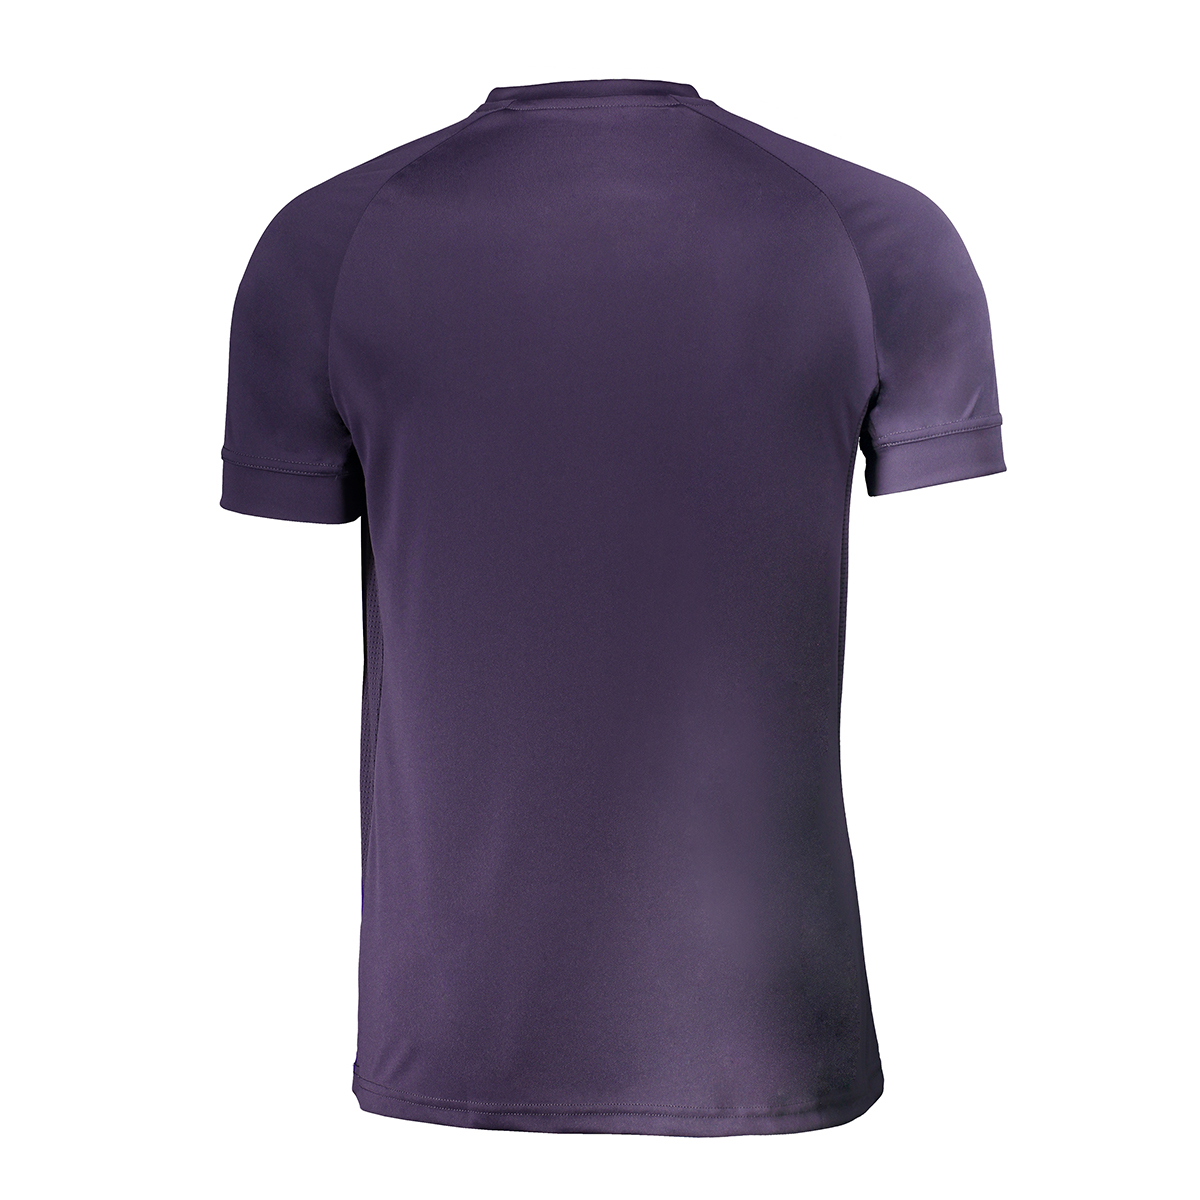 RSCA Training Jersey 2020/2021 - Purple is-hover